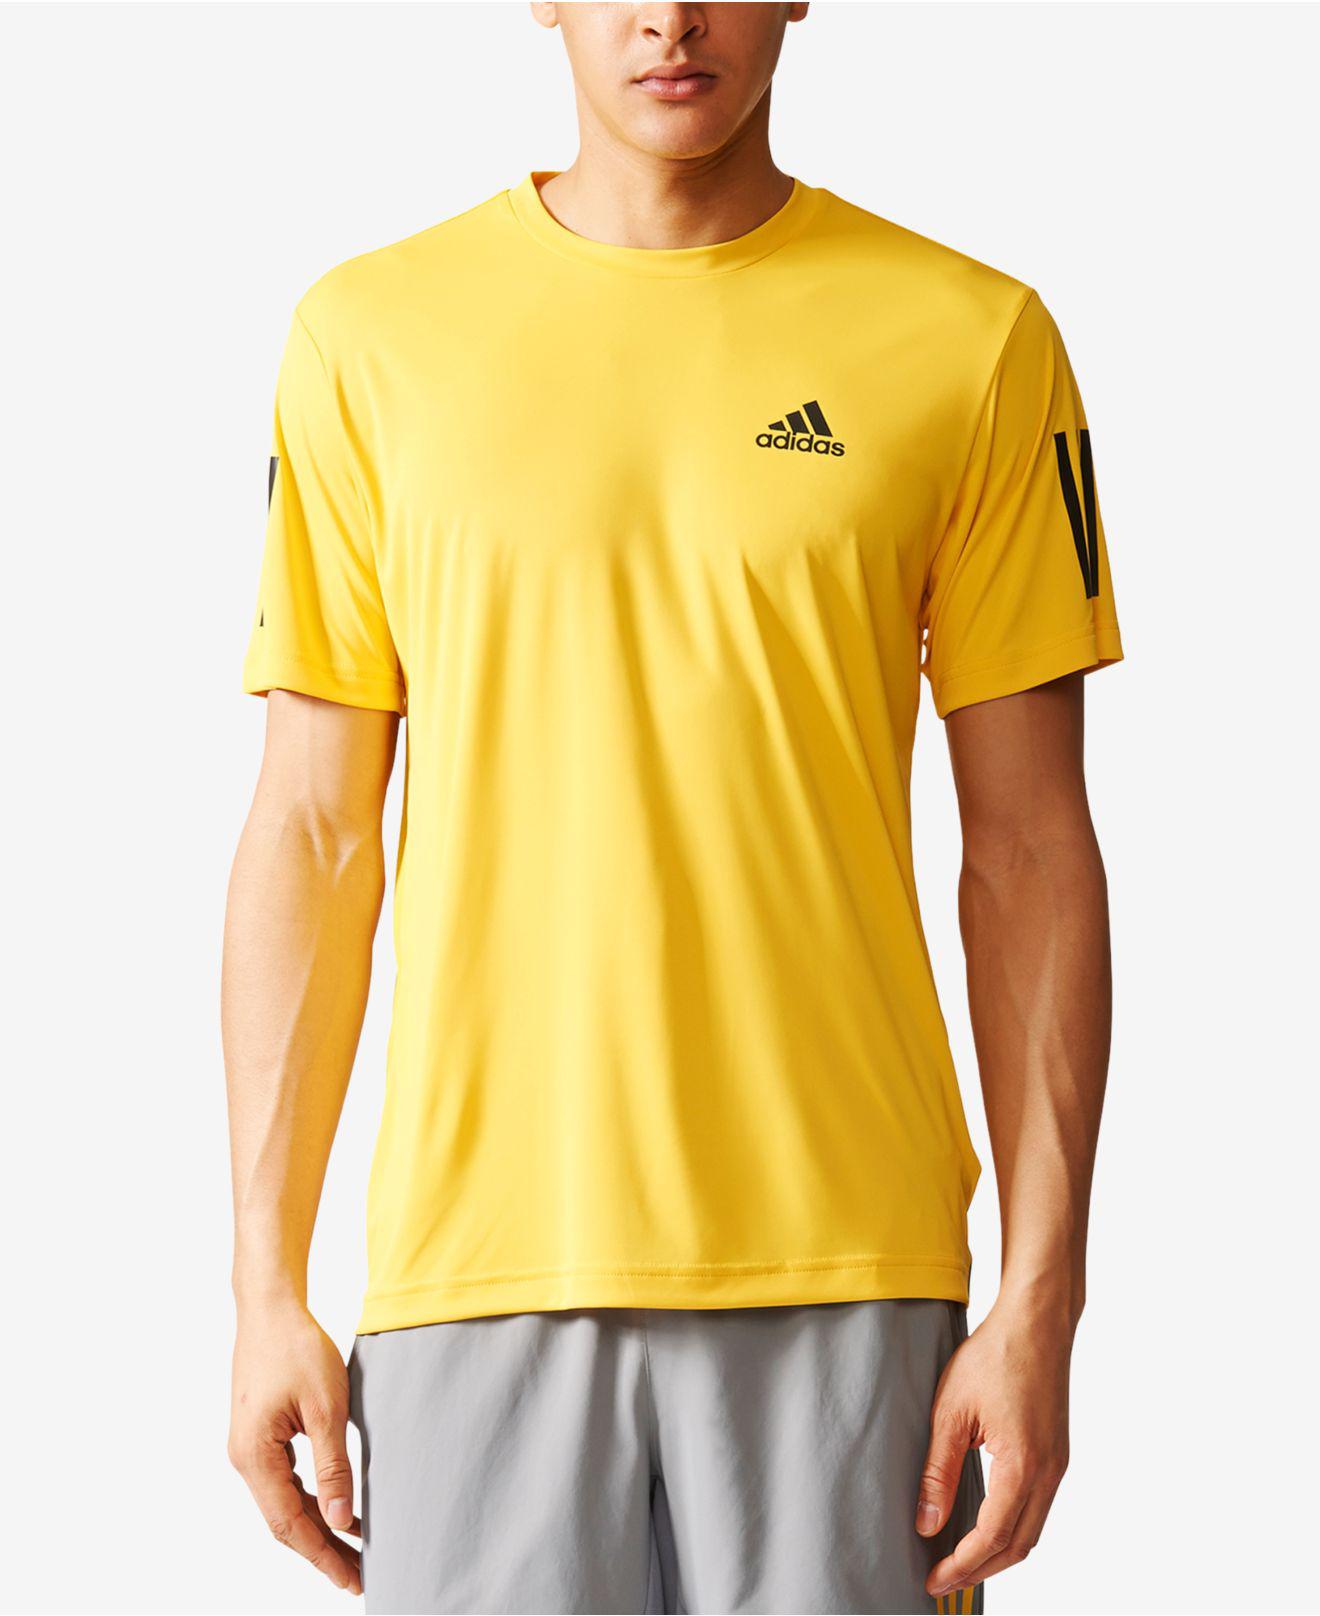  adidas  Synthetic Men s Climacool  Tennis  T shirt  in Yellow 